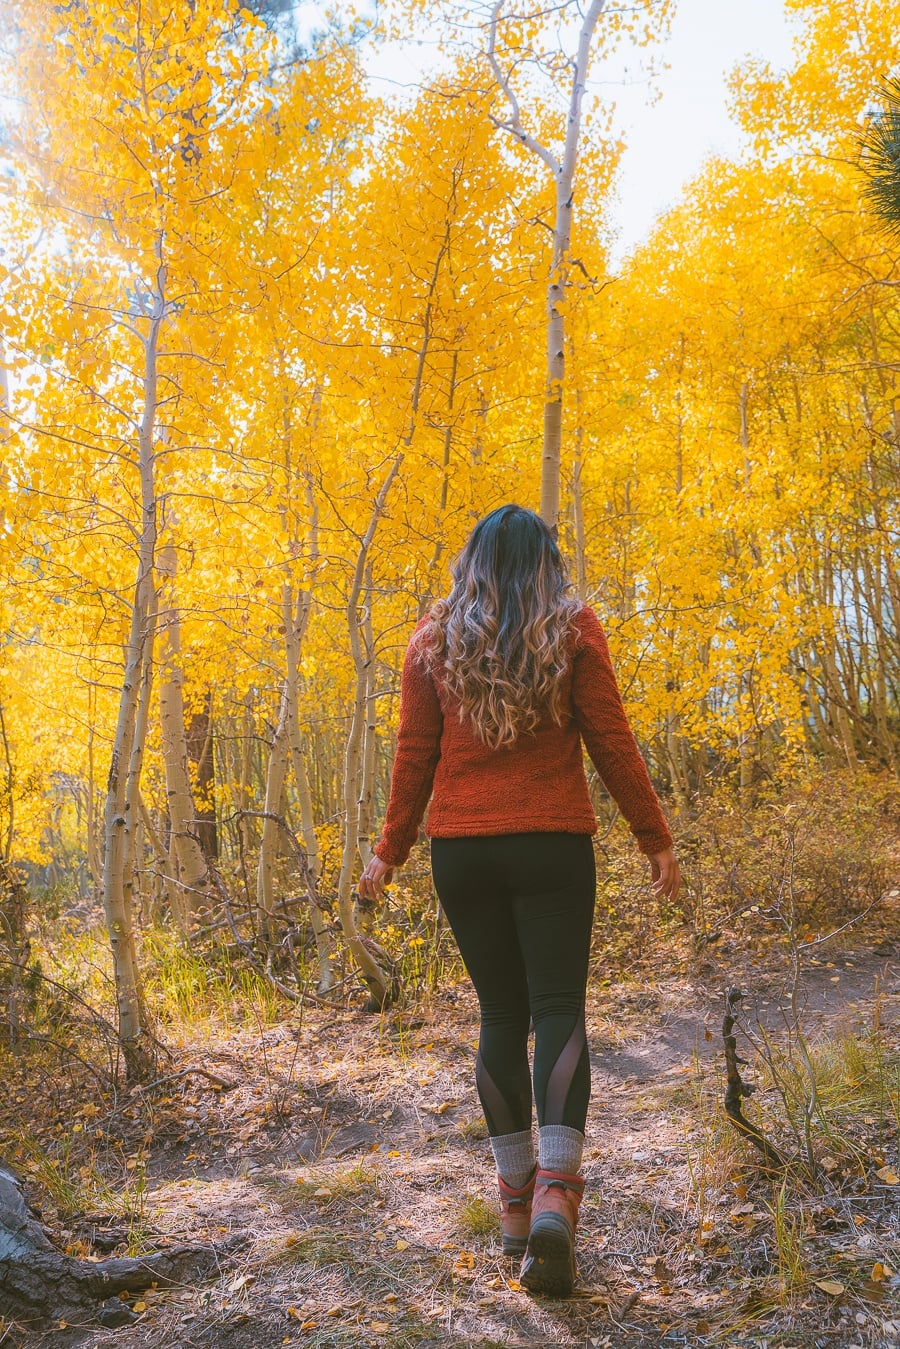 What To Wear: Fall Hiking Outfit, LivvyLand